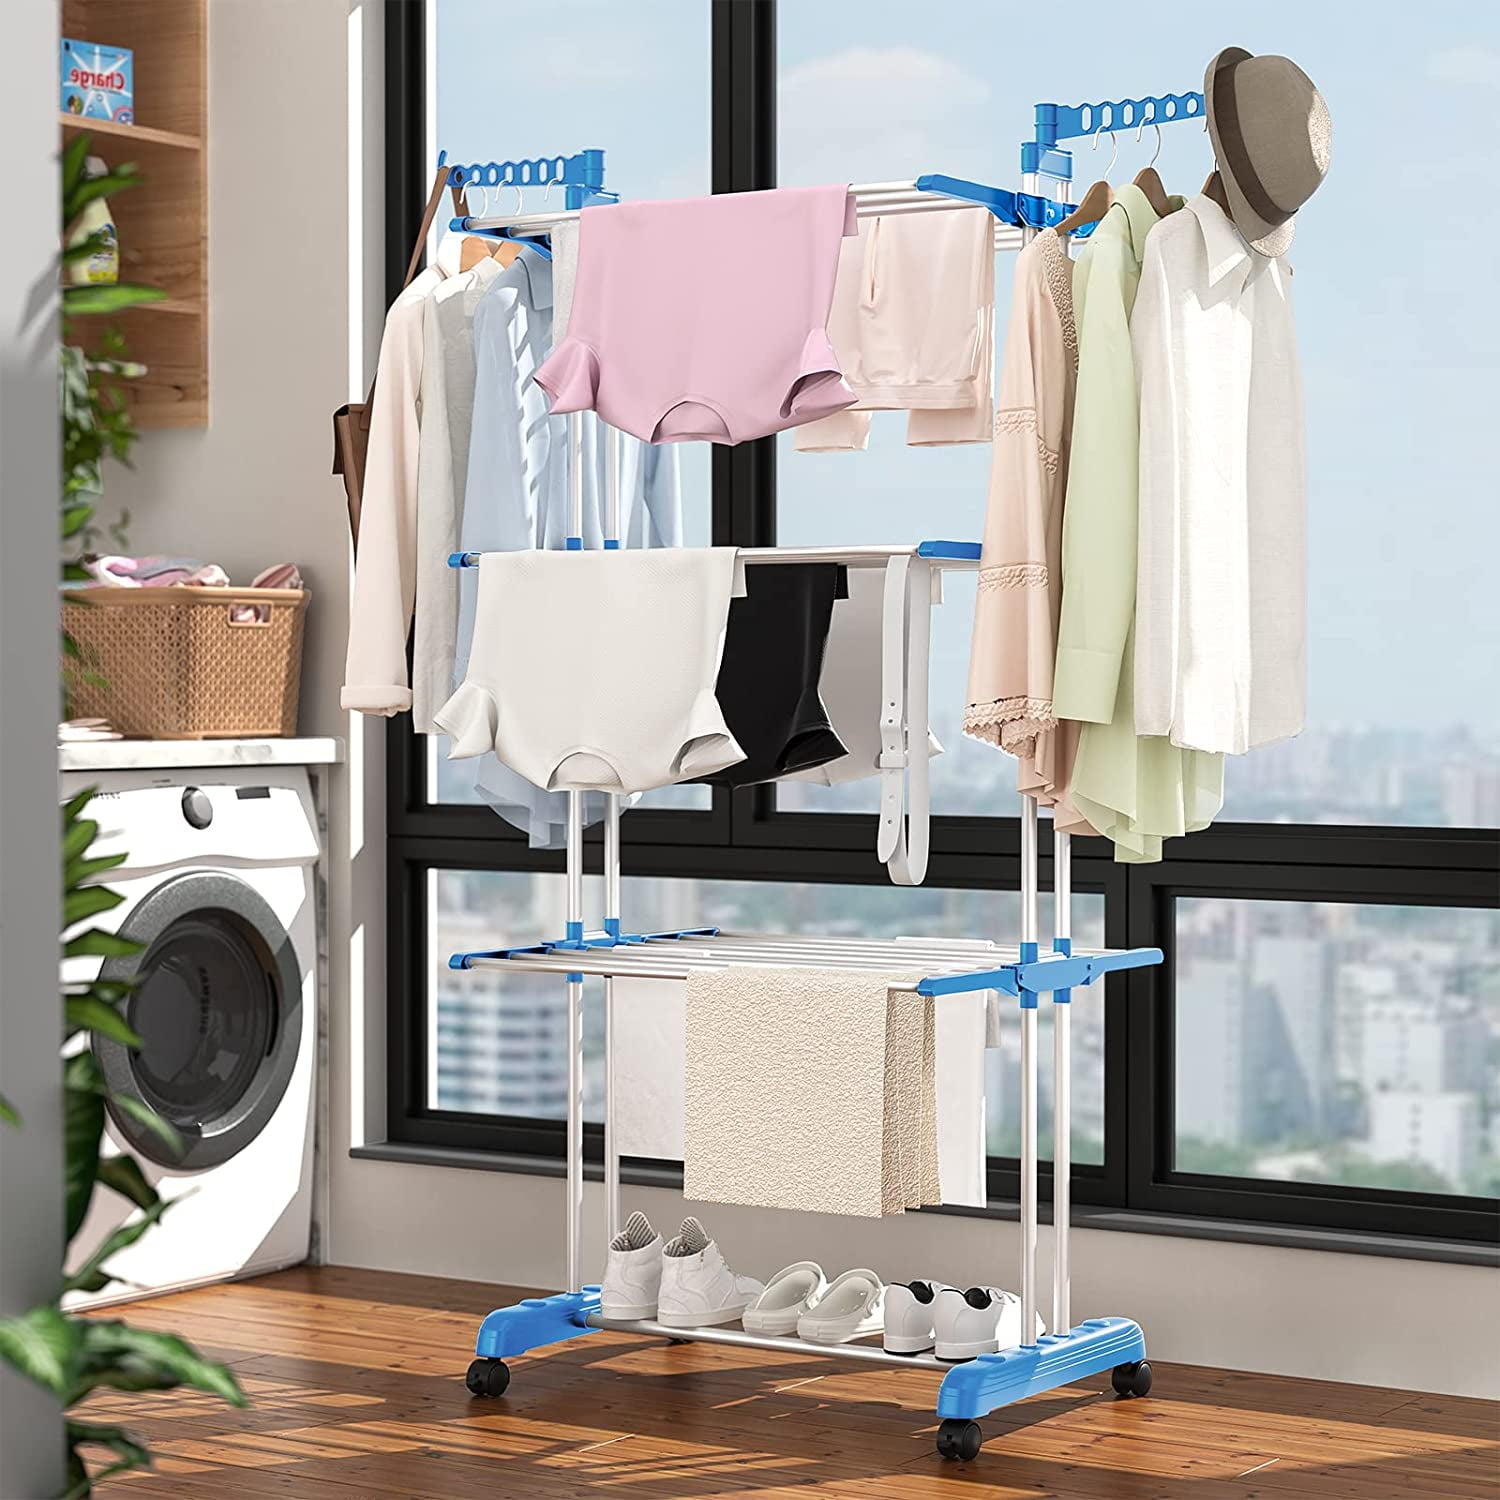 Buy Clothes Drying Racks, 3 Tier Collapsible Rolling Dryer Clothes Hanger  Rack Rail Stand with Side Wings, Stainless Steel Clothes Airer for Laundry,  Sky Blue, [Made in India] 2 Year Manufacturer Warrnty